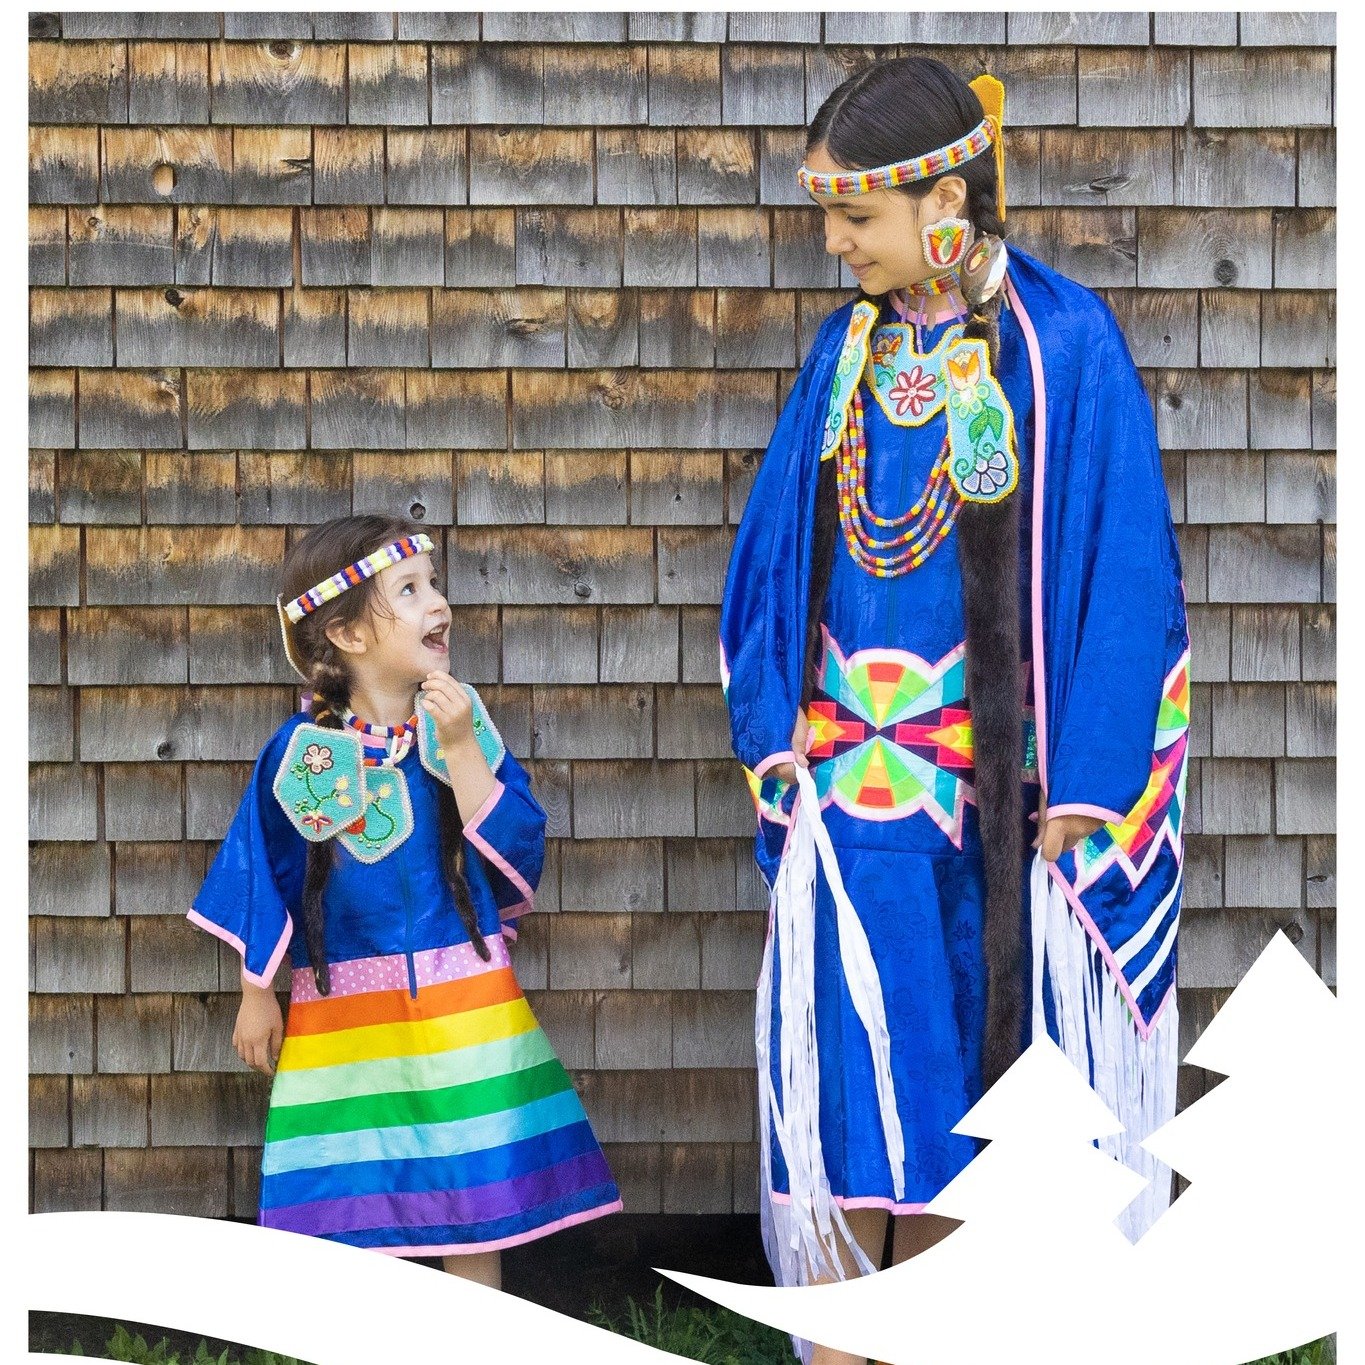 Expect to meet lots of friendly folks at one of our many festivals and events happening throughout the Miramichi region. We have a wide variety of festivals that showcase our heritage, culture, and fun-loving nature. 

https://www.discovermiramichi.c